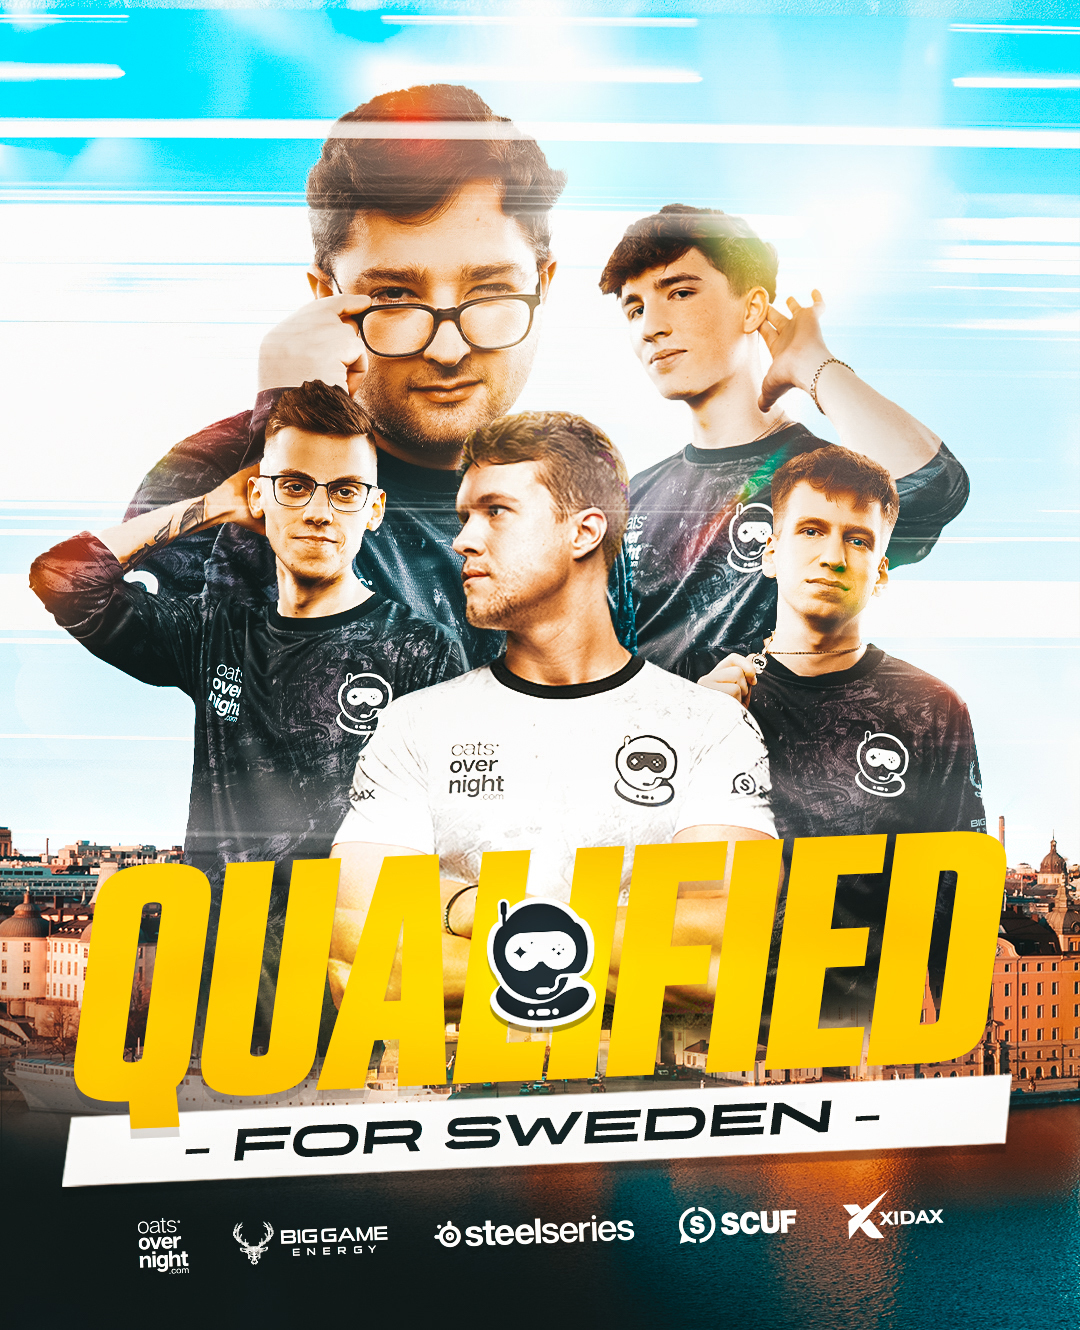 A promotional poster of Spacestation's R6 roster, released after the team qualified for the Sweden Major